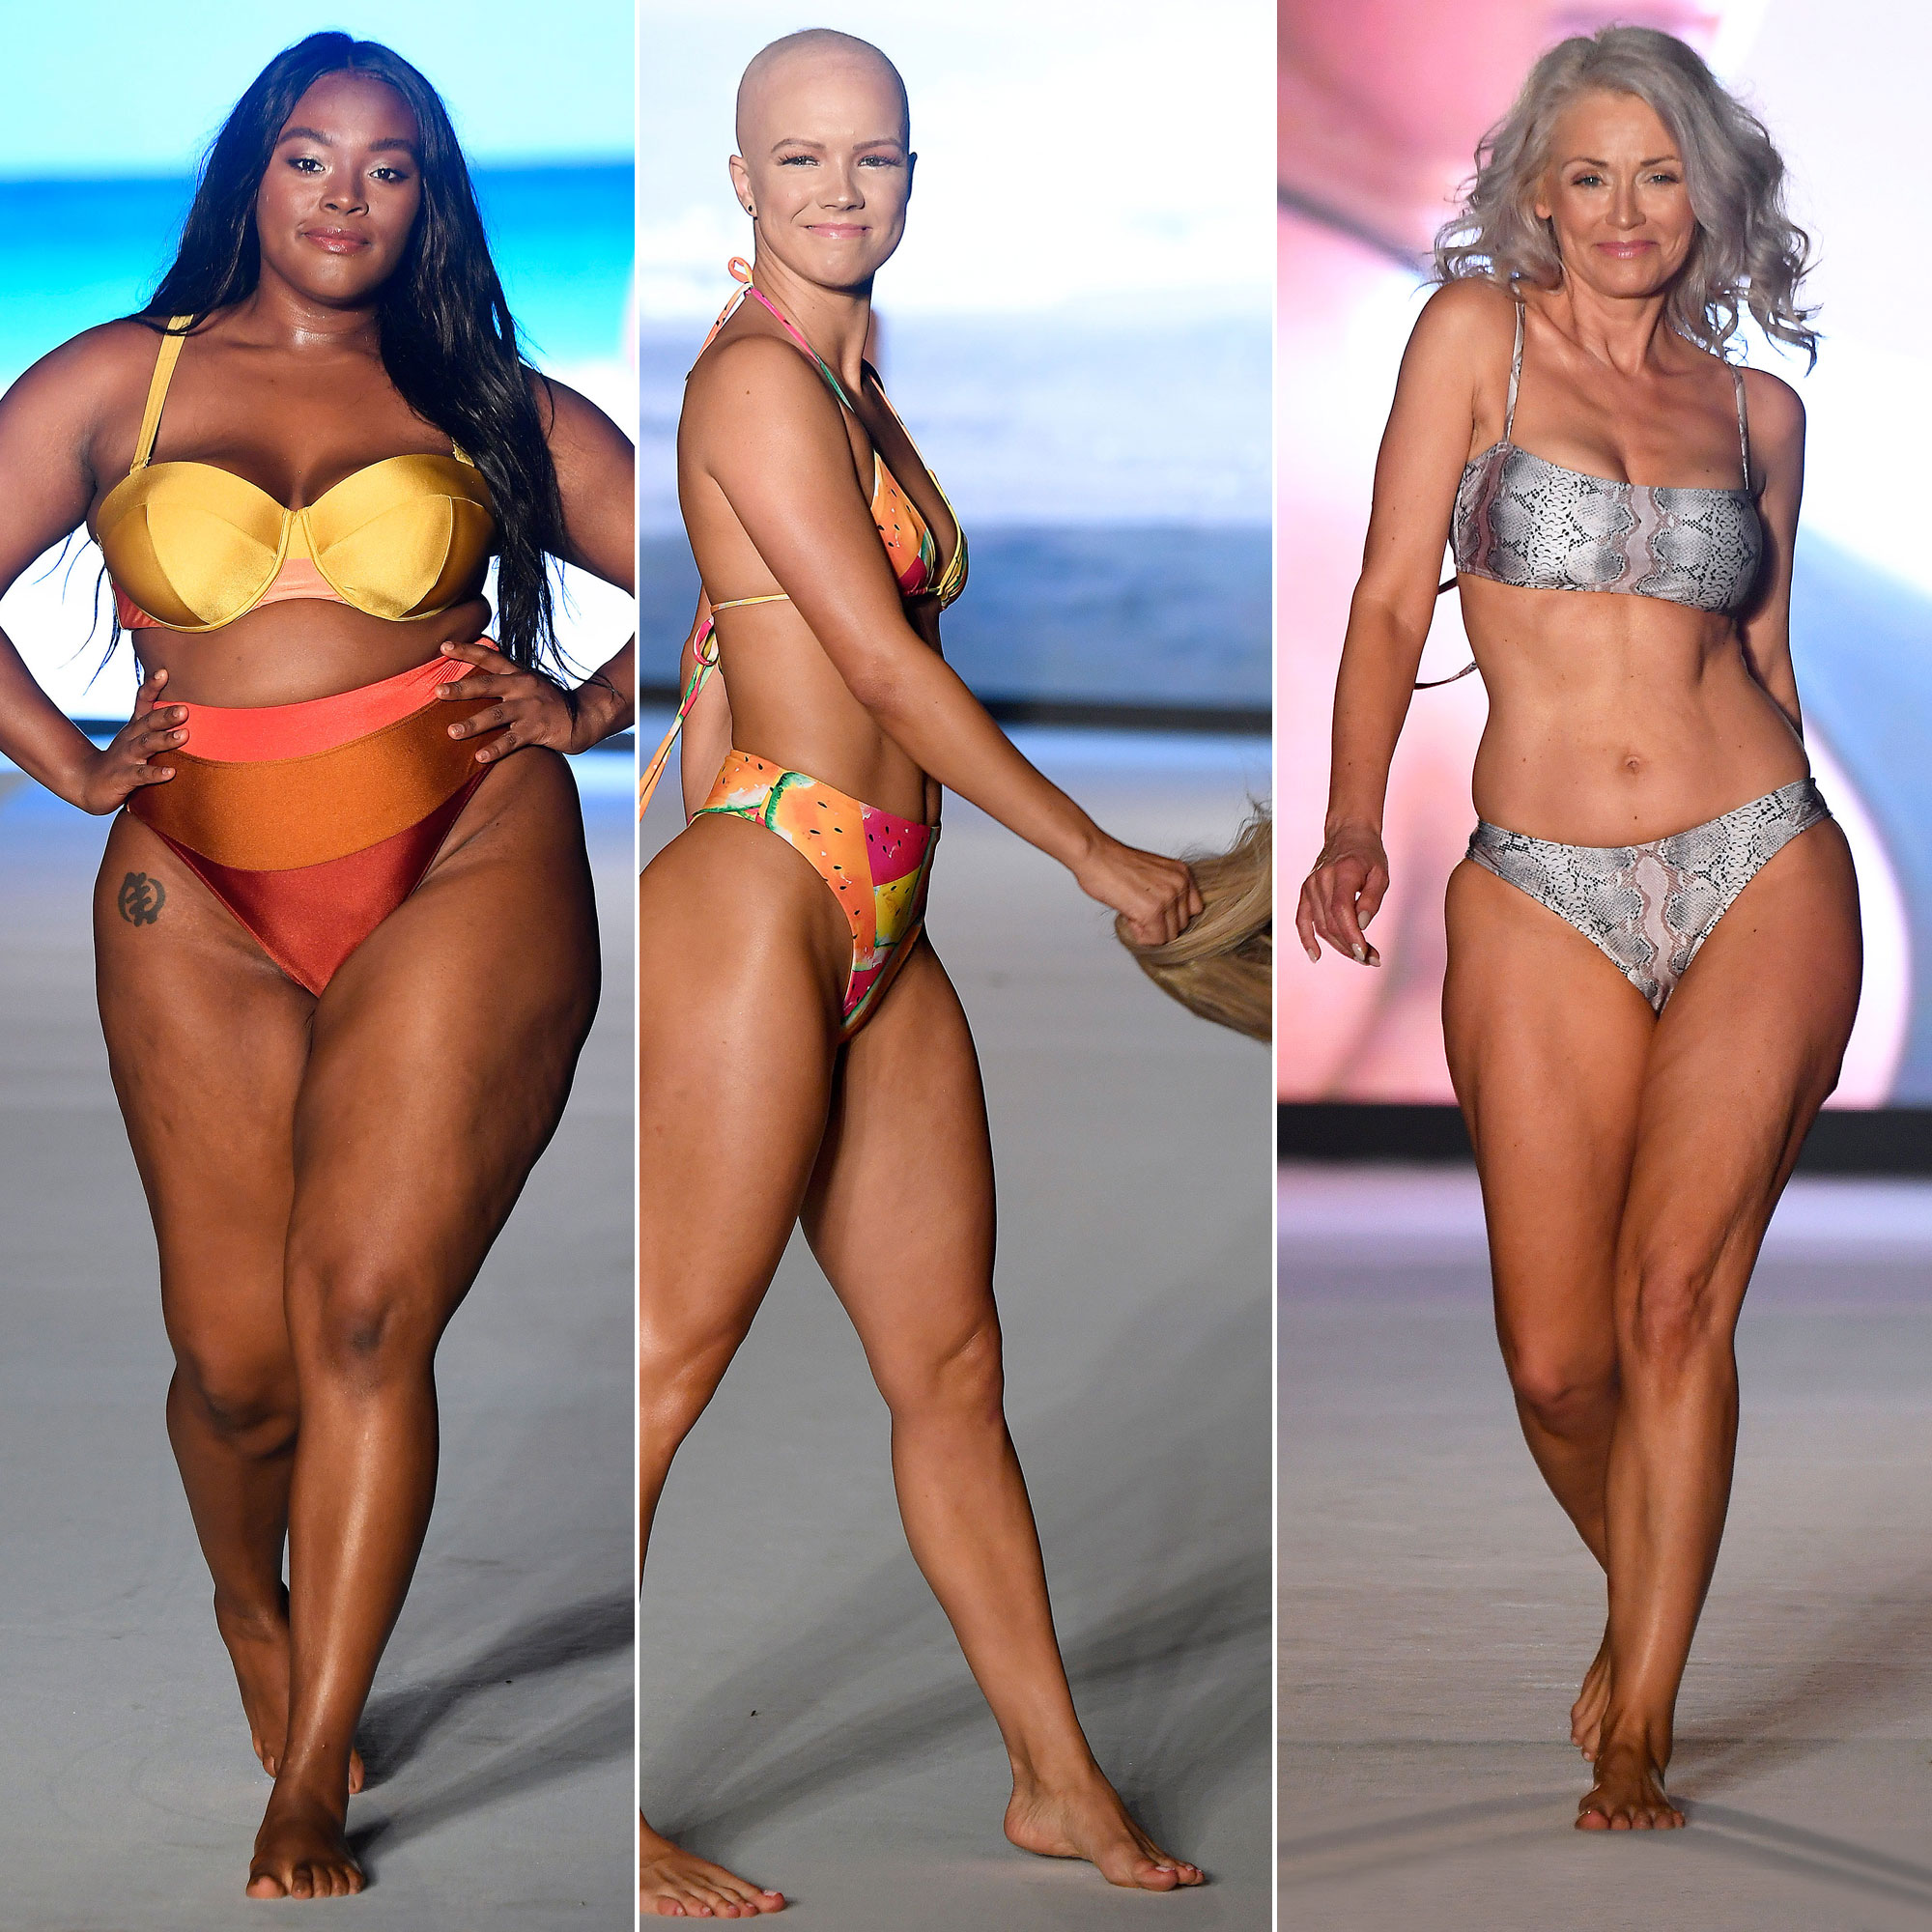 Sports Illustrated Swim' Search Finalists on Diversity, Inclusion